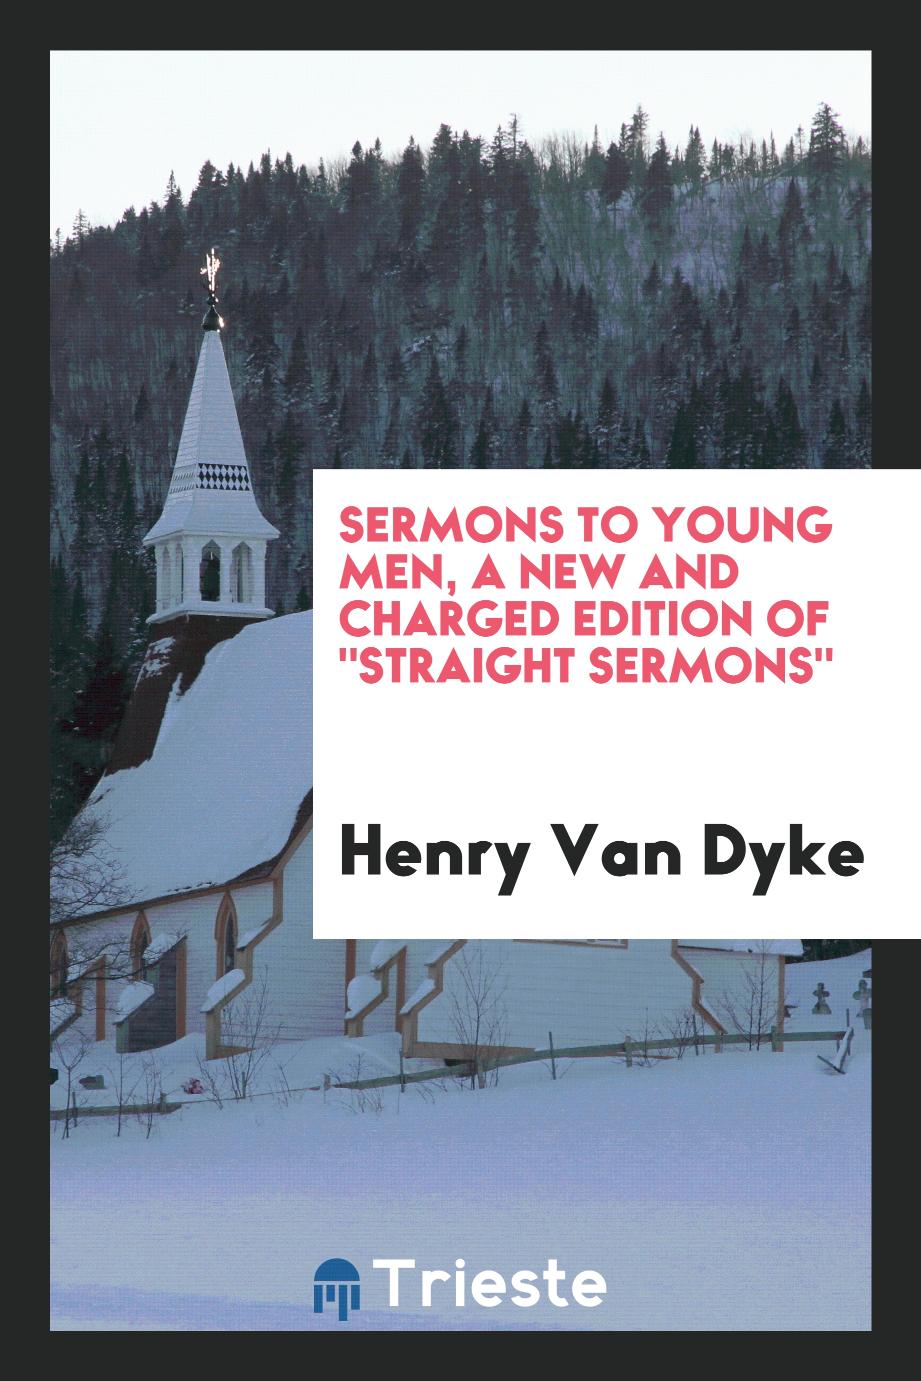 Sermons to young men, a new and charged edition of "Straight Sermons"